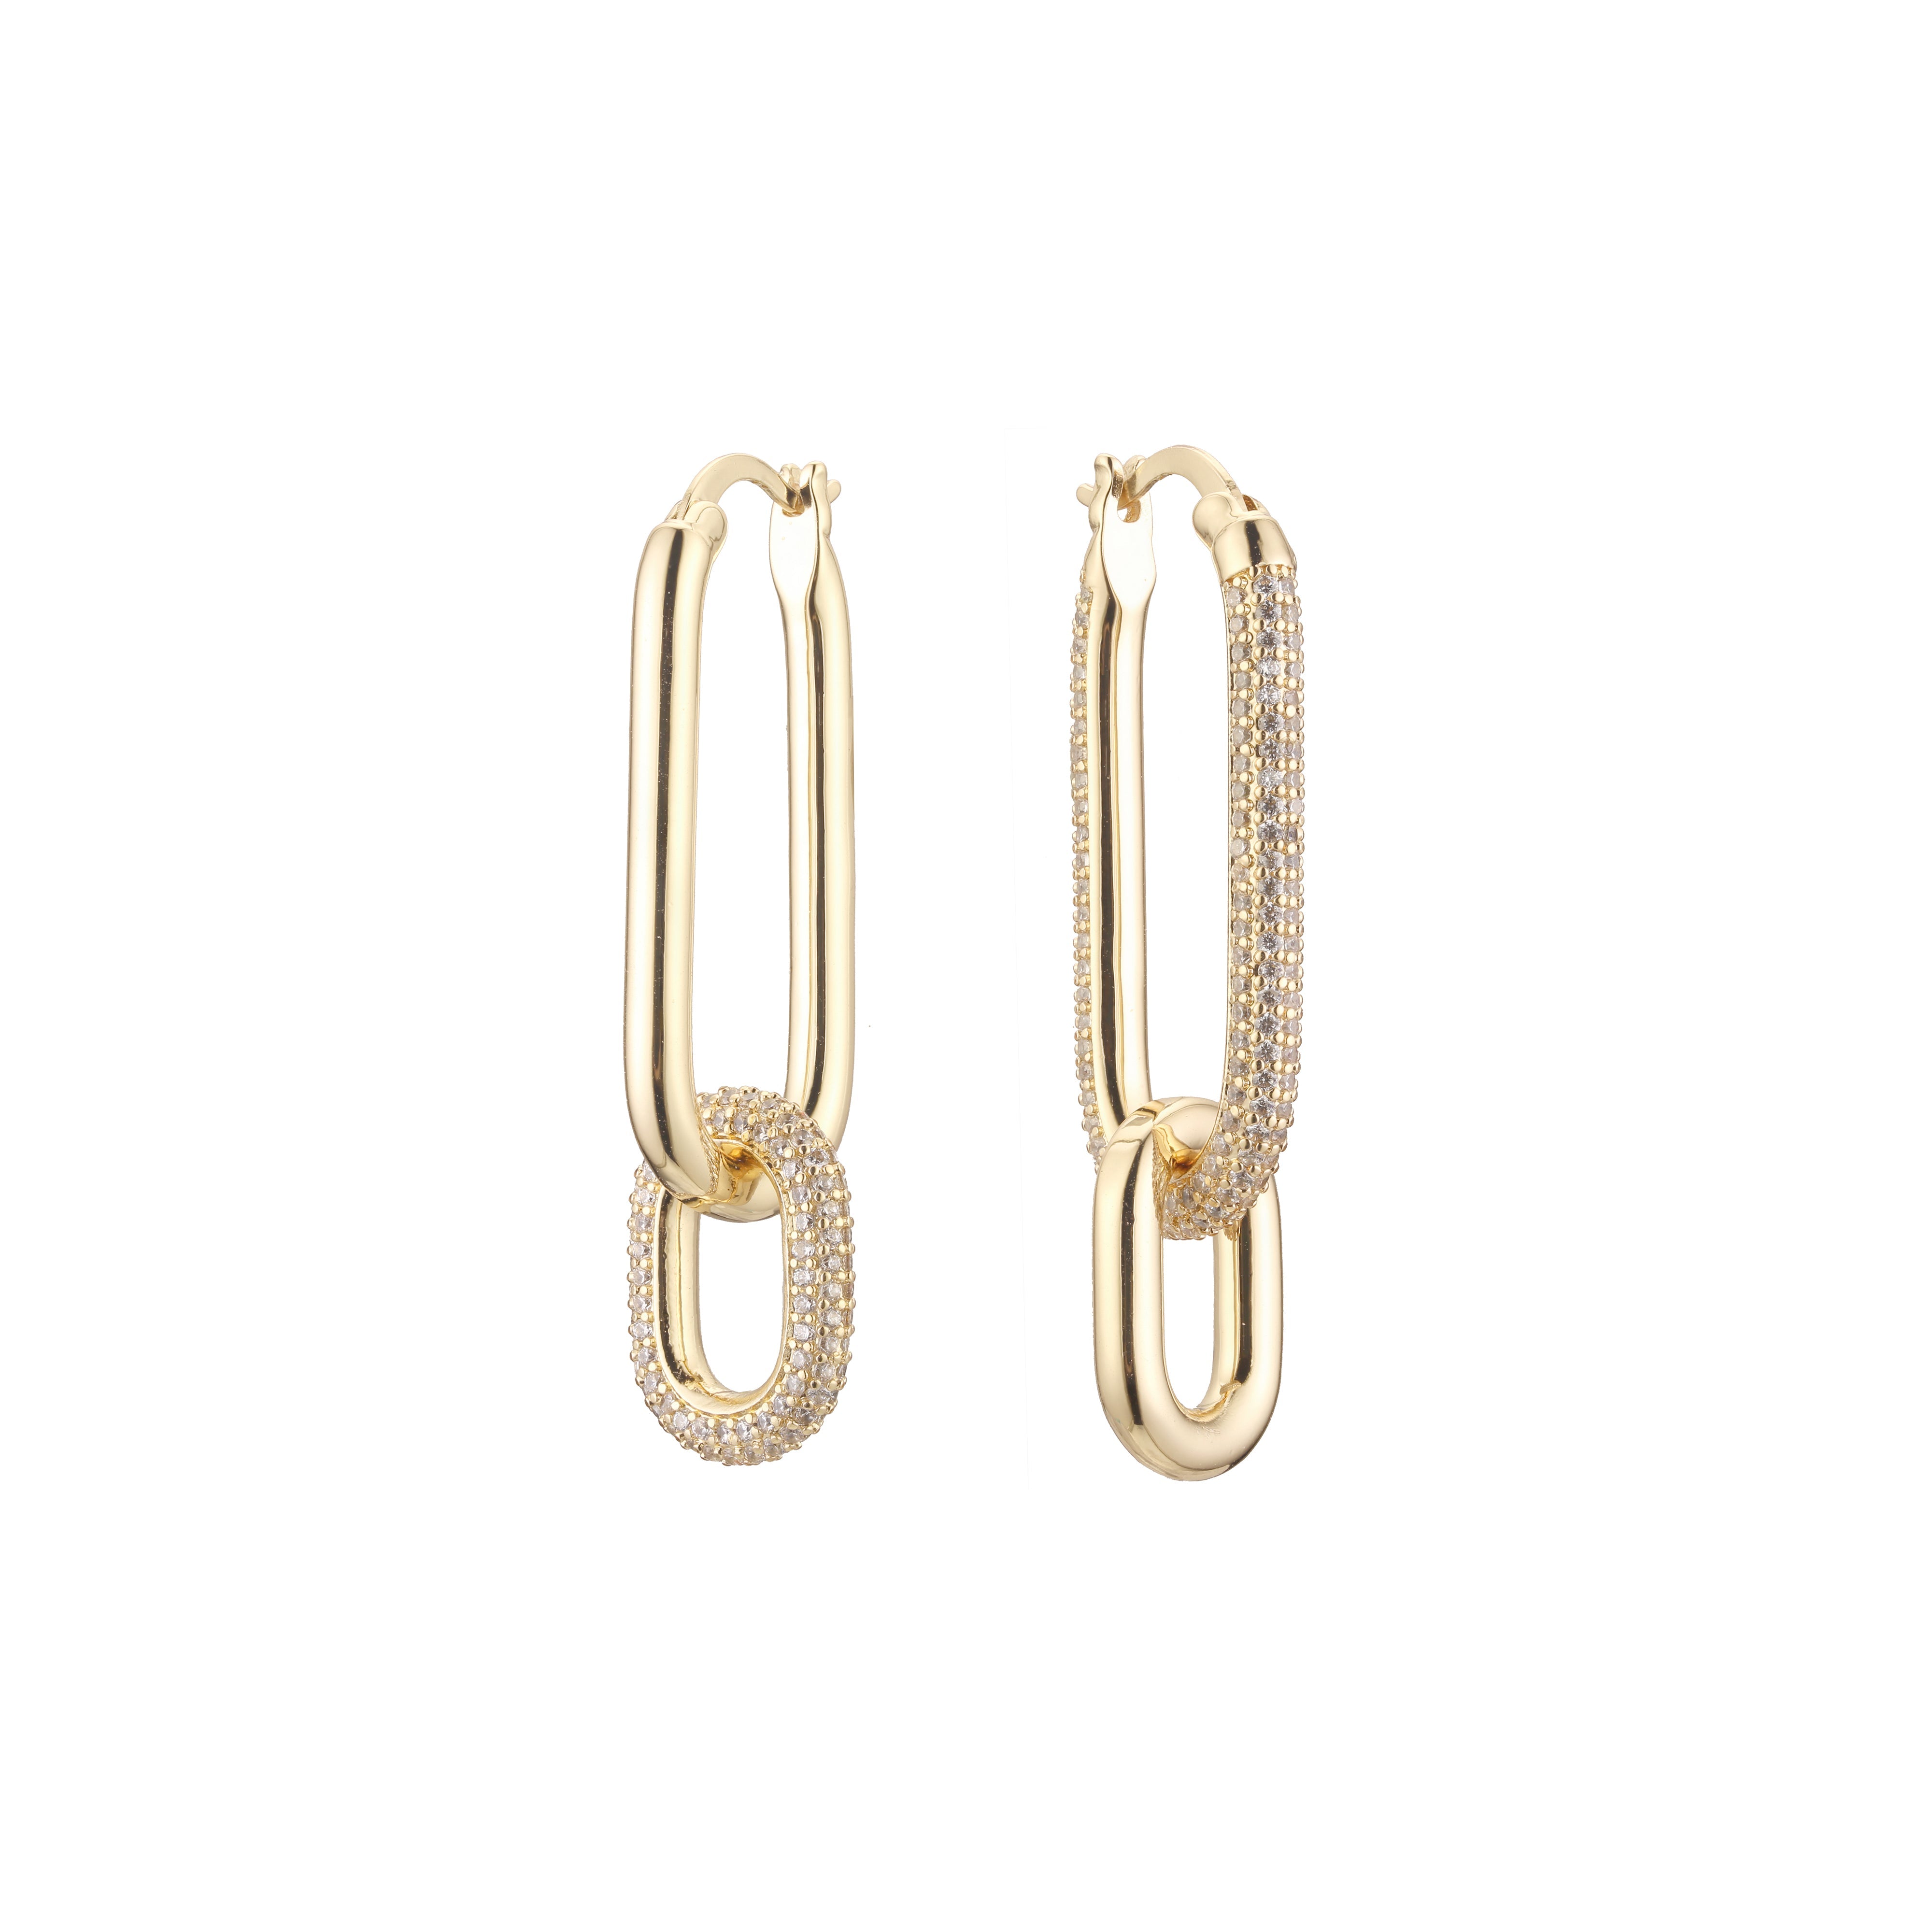 Double hoop paperclip earrings in 14K Gold, Rose Gold plating colors